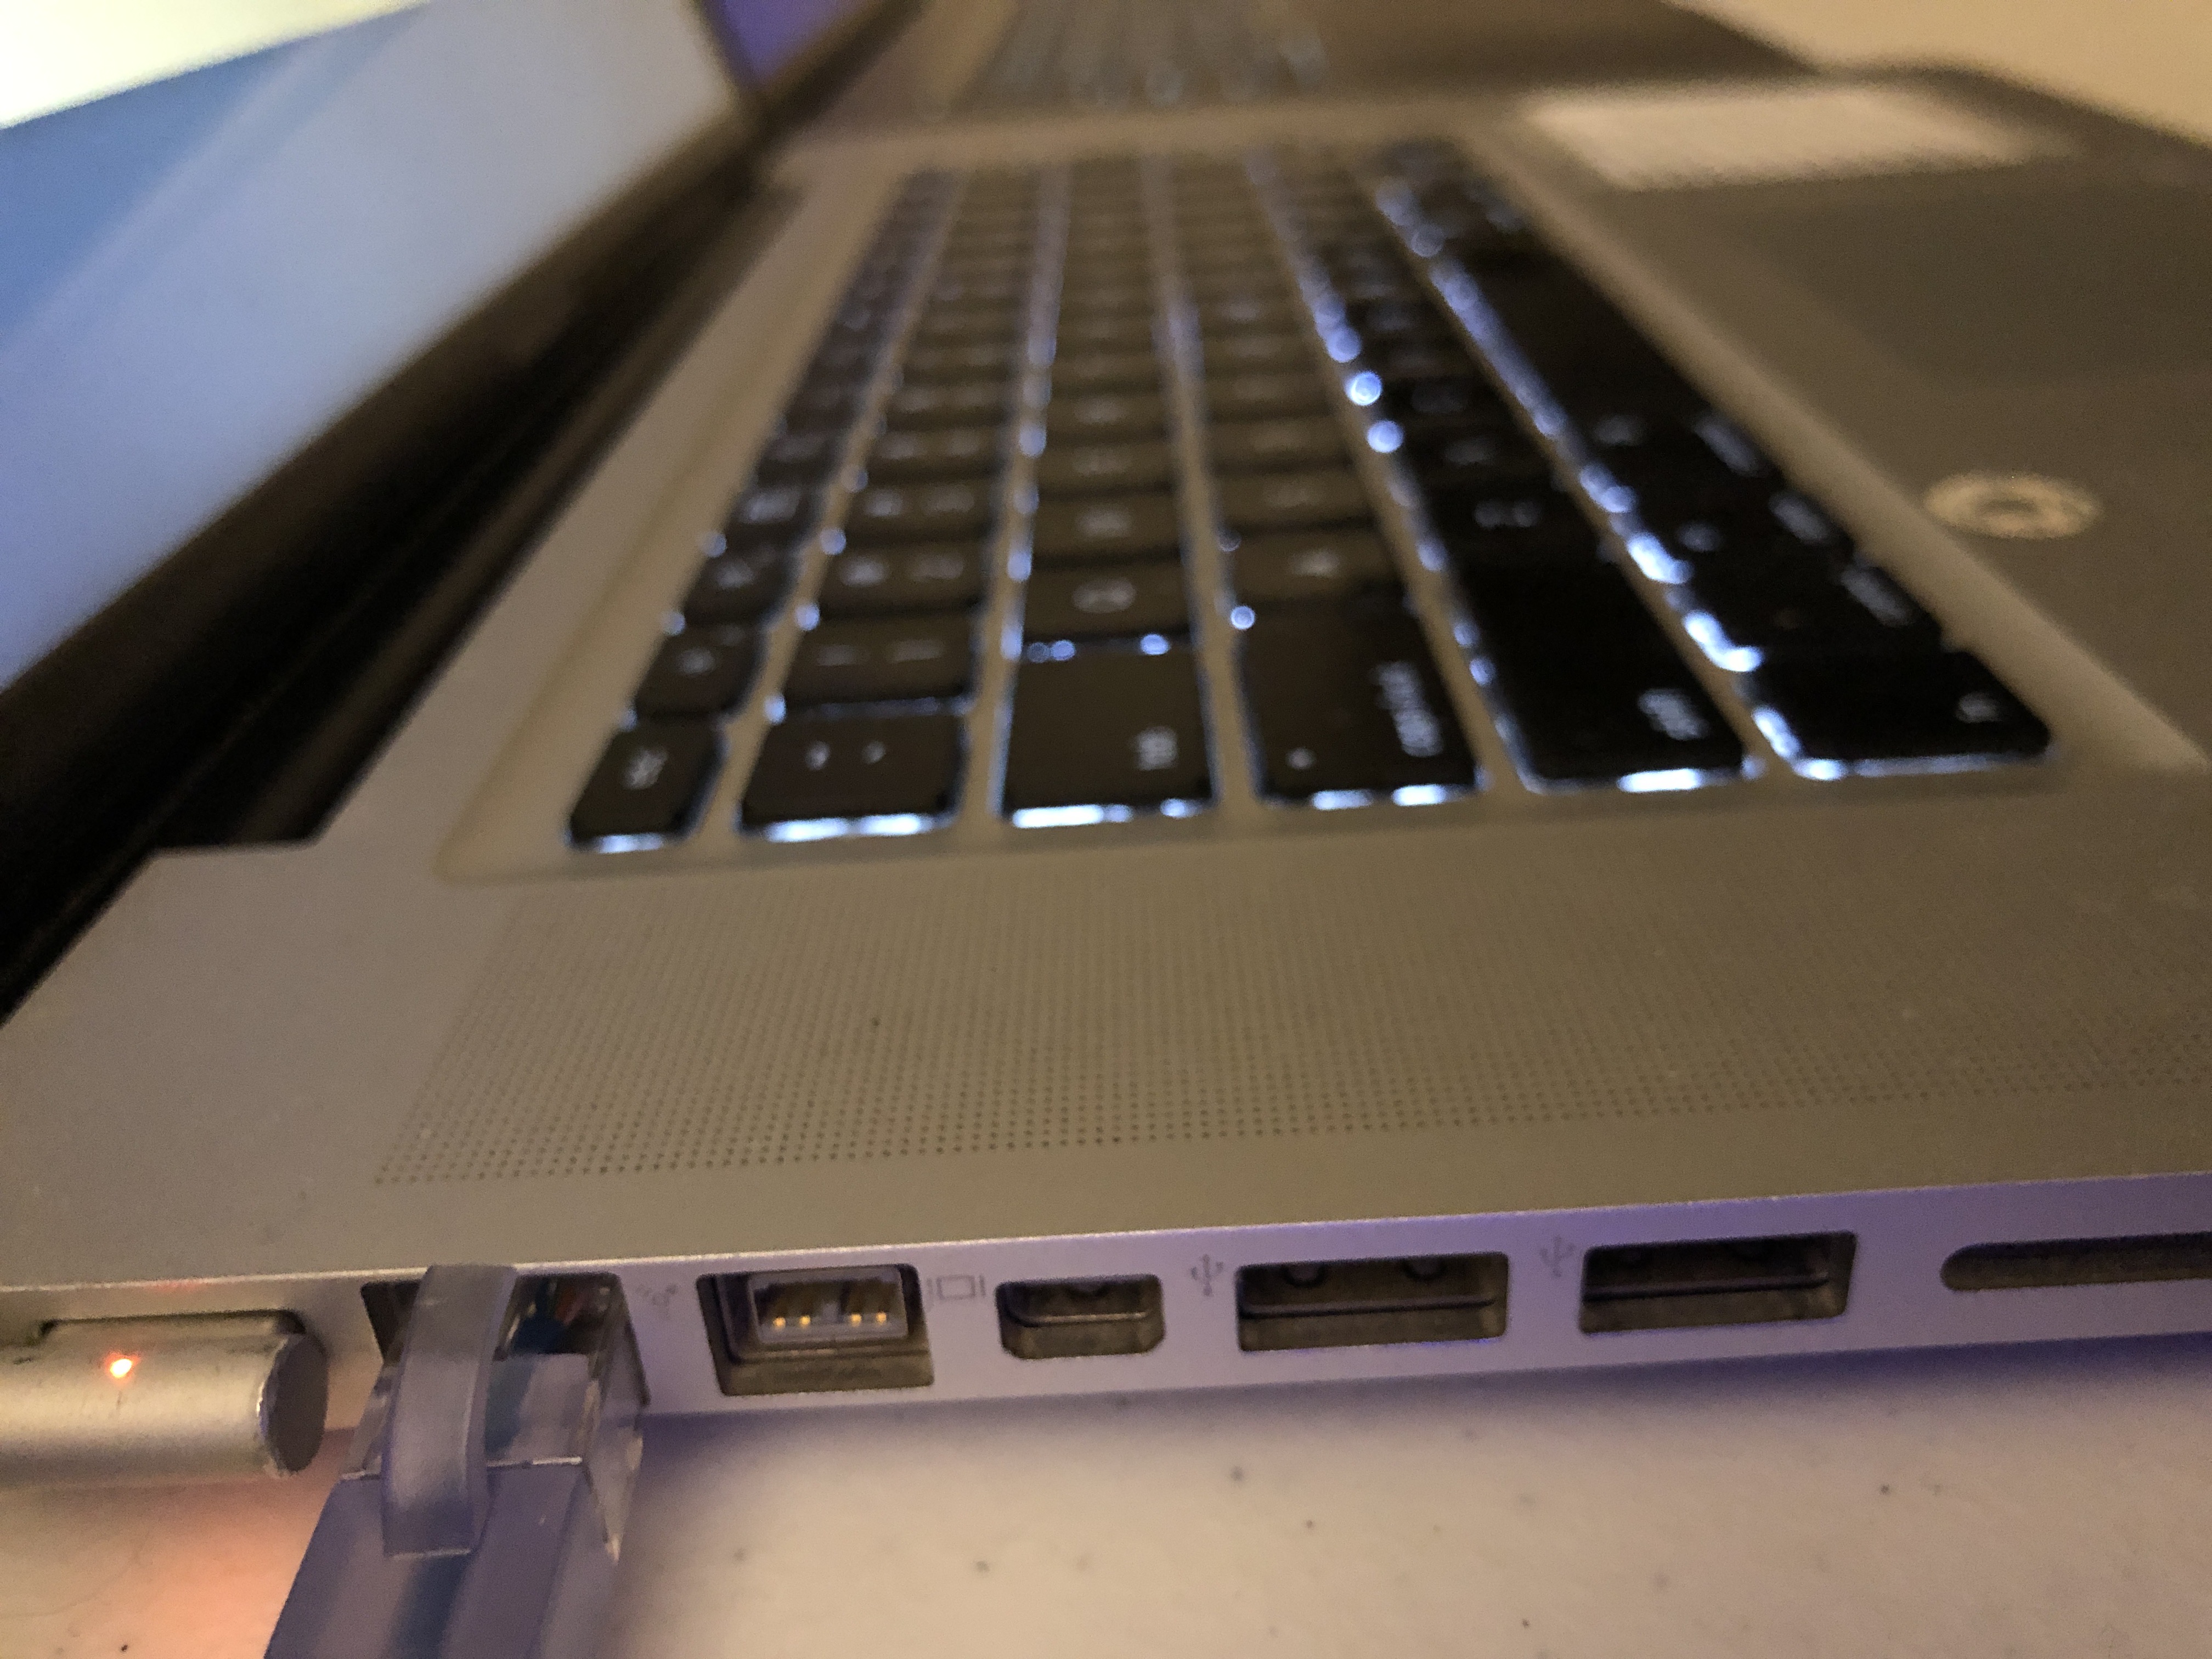 A side view of an old MacBook, showing ethernet, MagSafe, USB, SD card, DisplayPort and Thunderbolt ports. 